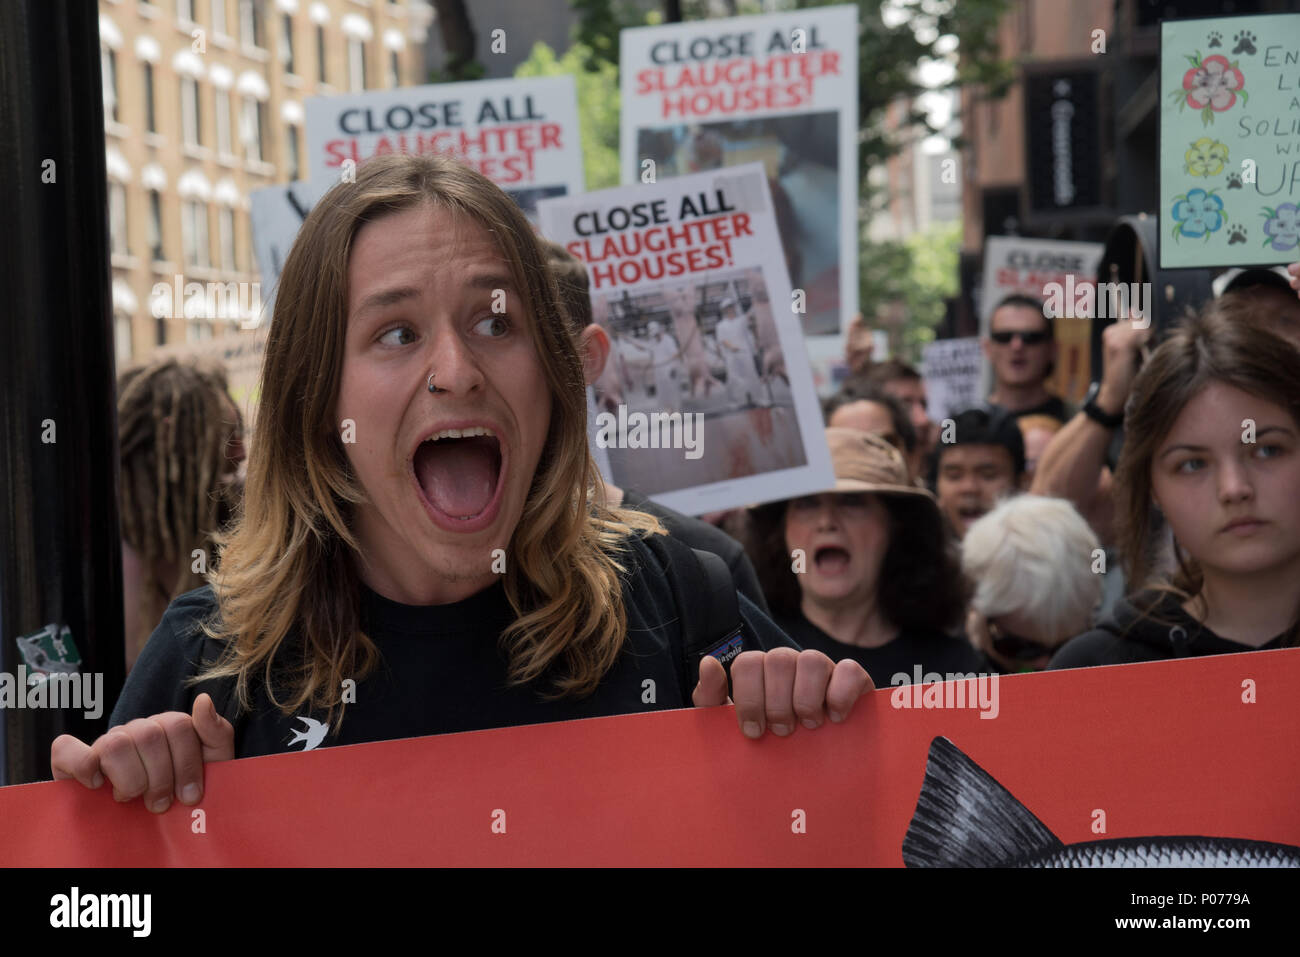 Hunderds of animals activists March to demand Close all Slaughterhouses 2018, June 9 2018 in London, UK Credit: See Li/Alamy Live News Credit: See Li/Alamy Live News Stock Photo